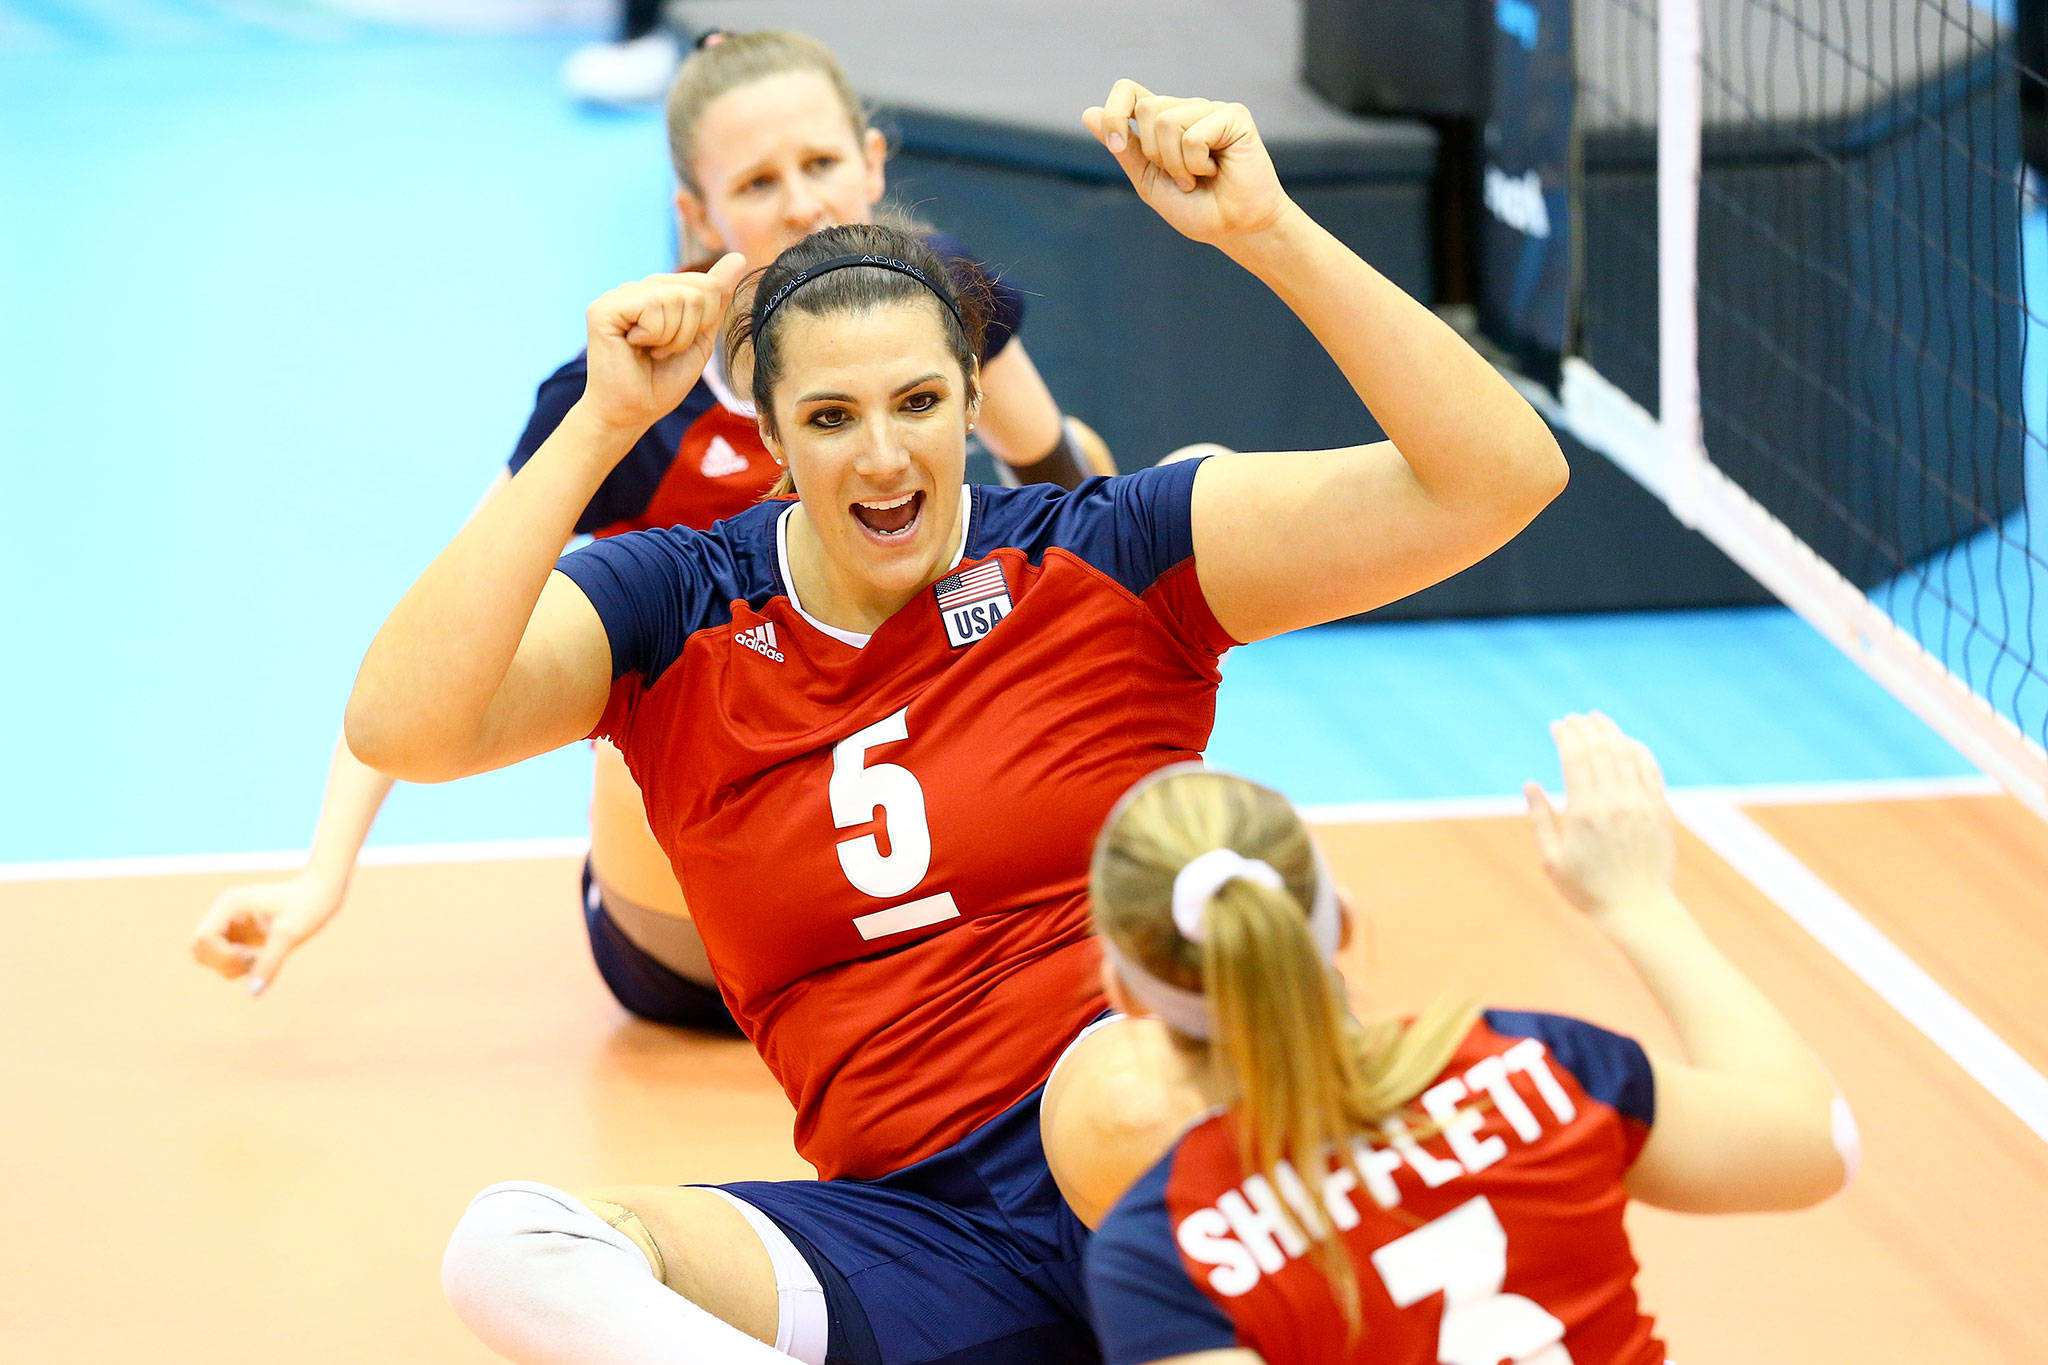 Katie Holloway, a 2004 Lake Stevens High School graduate, is headed to Tokyo to compete in her fourth Paralympic Games. (USA Volleyball)